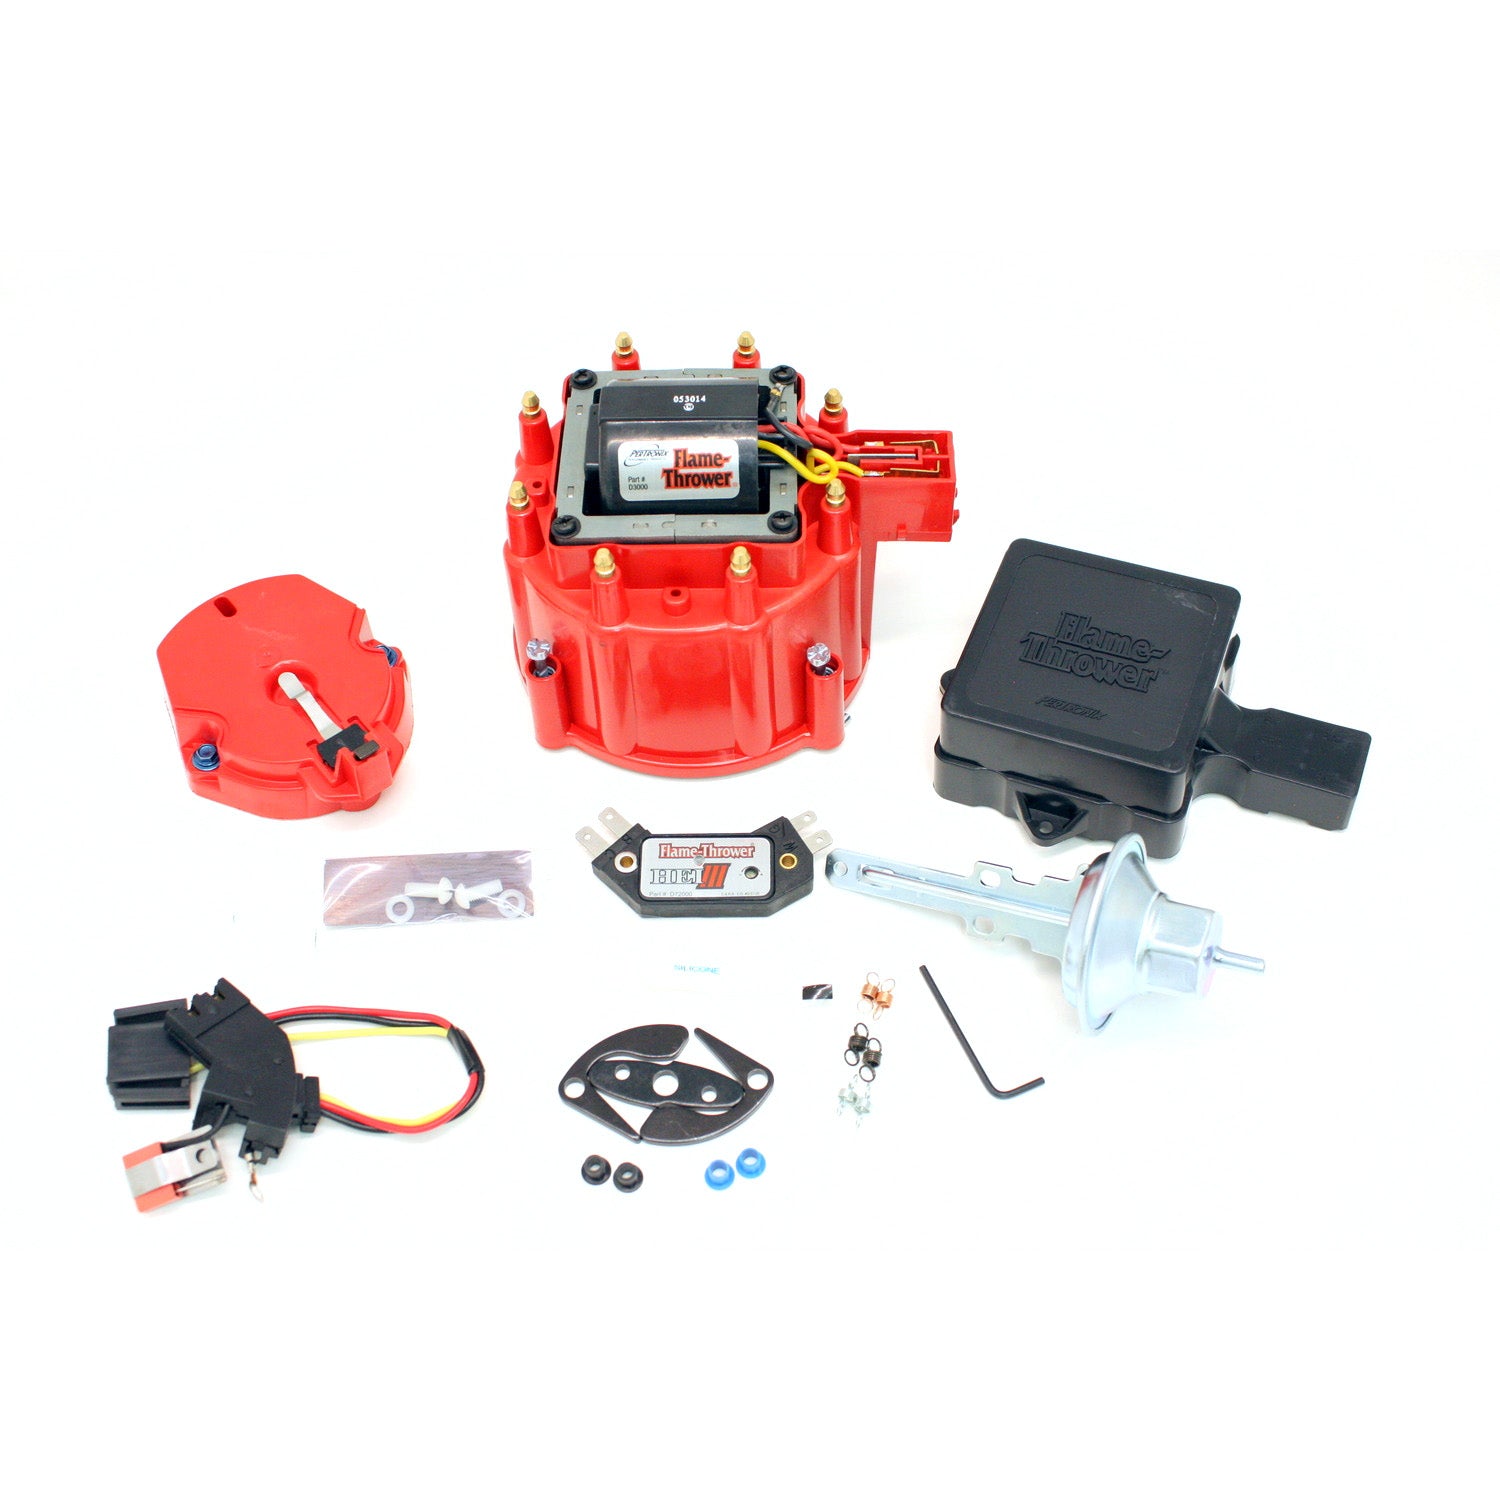 PerTronix D78001 Flame-Thrower GM HEI III Tune Up Chevrolet/Cadillac Kit Red Cap with multiple sparks and an adjustable digital rev limiter